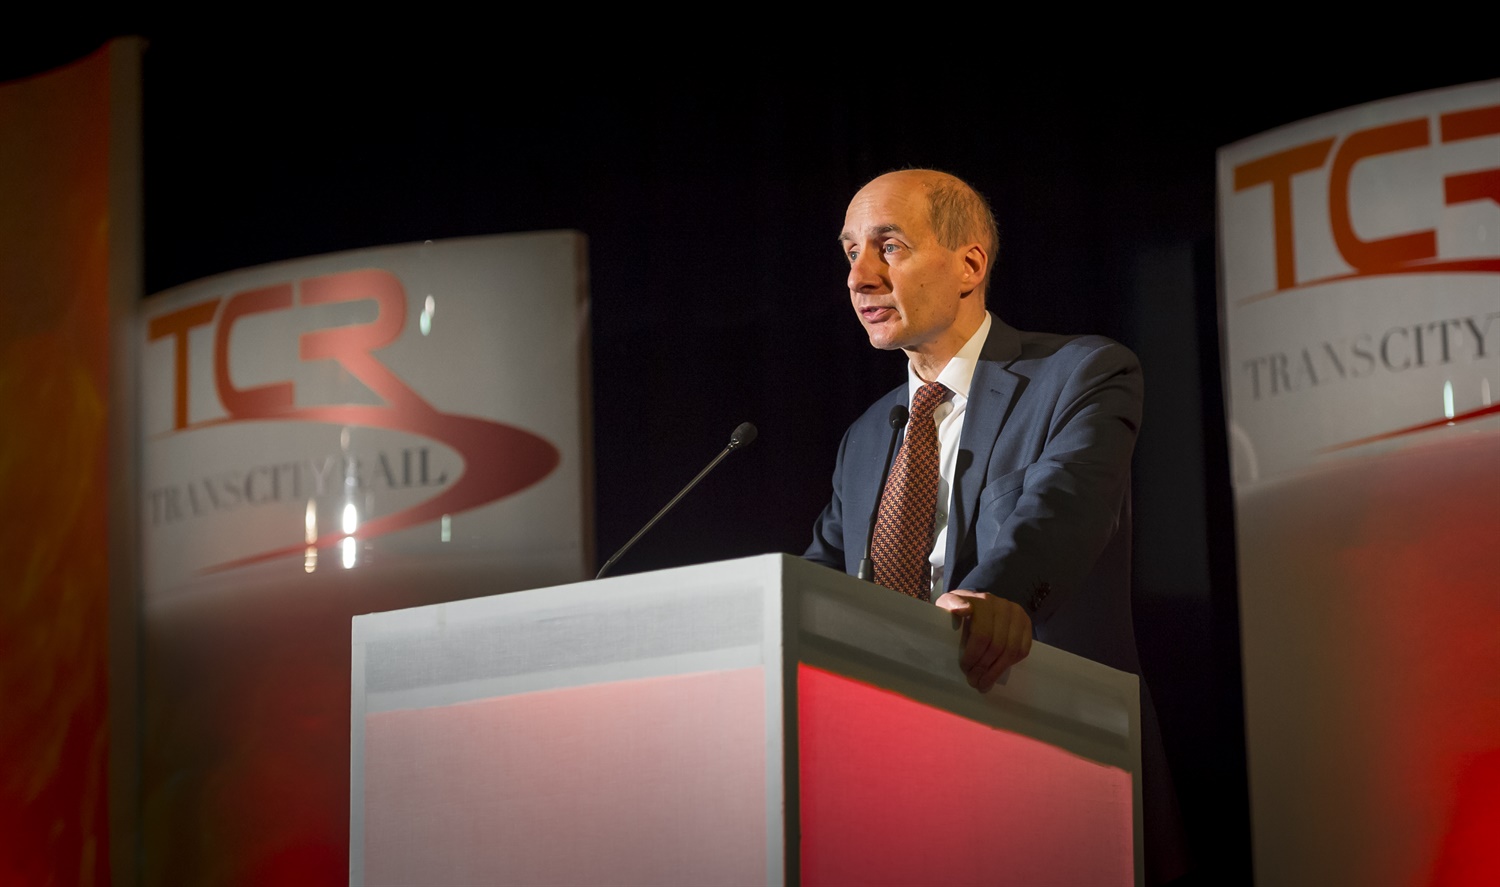 Lord Adonis: Businesses should help pay for HS3 because they will benefit